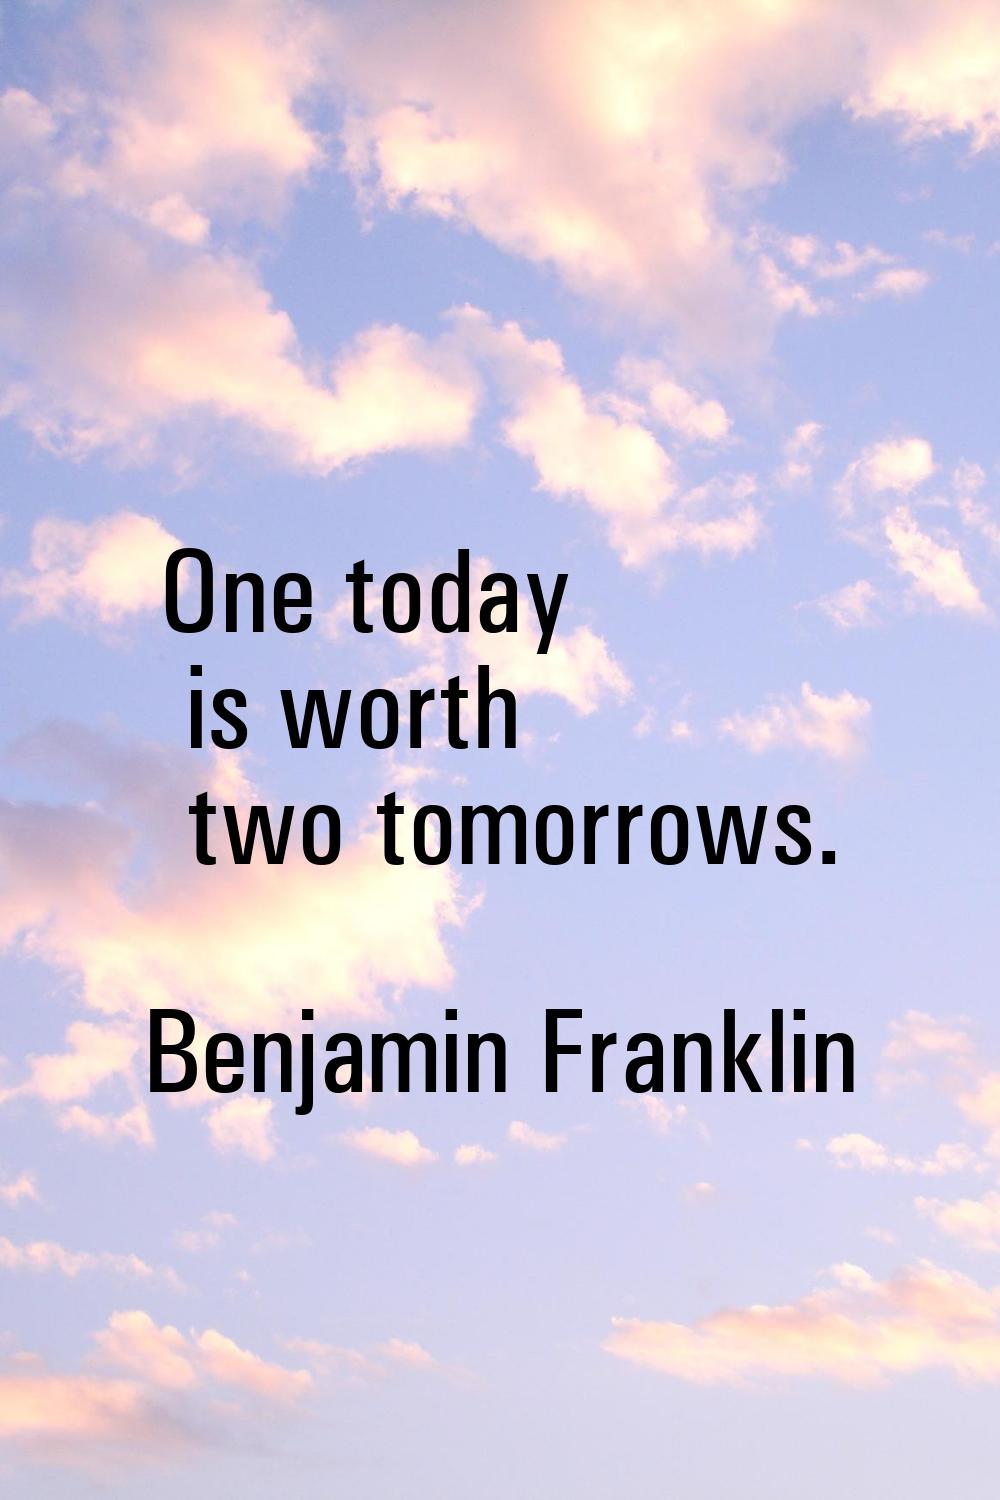 One today is worth two tomorrows.